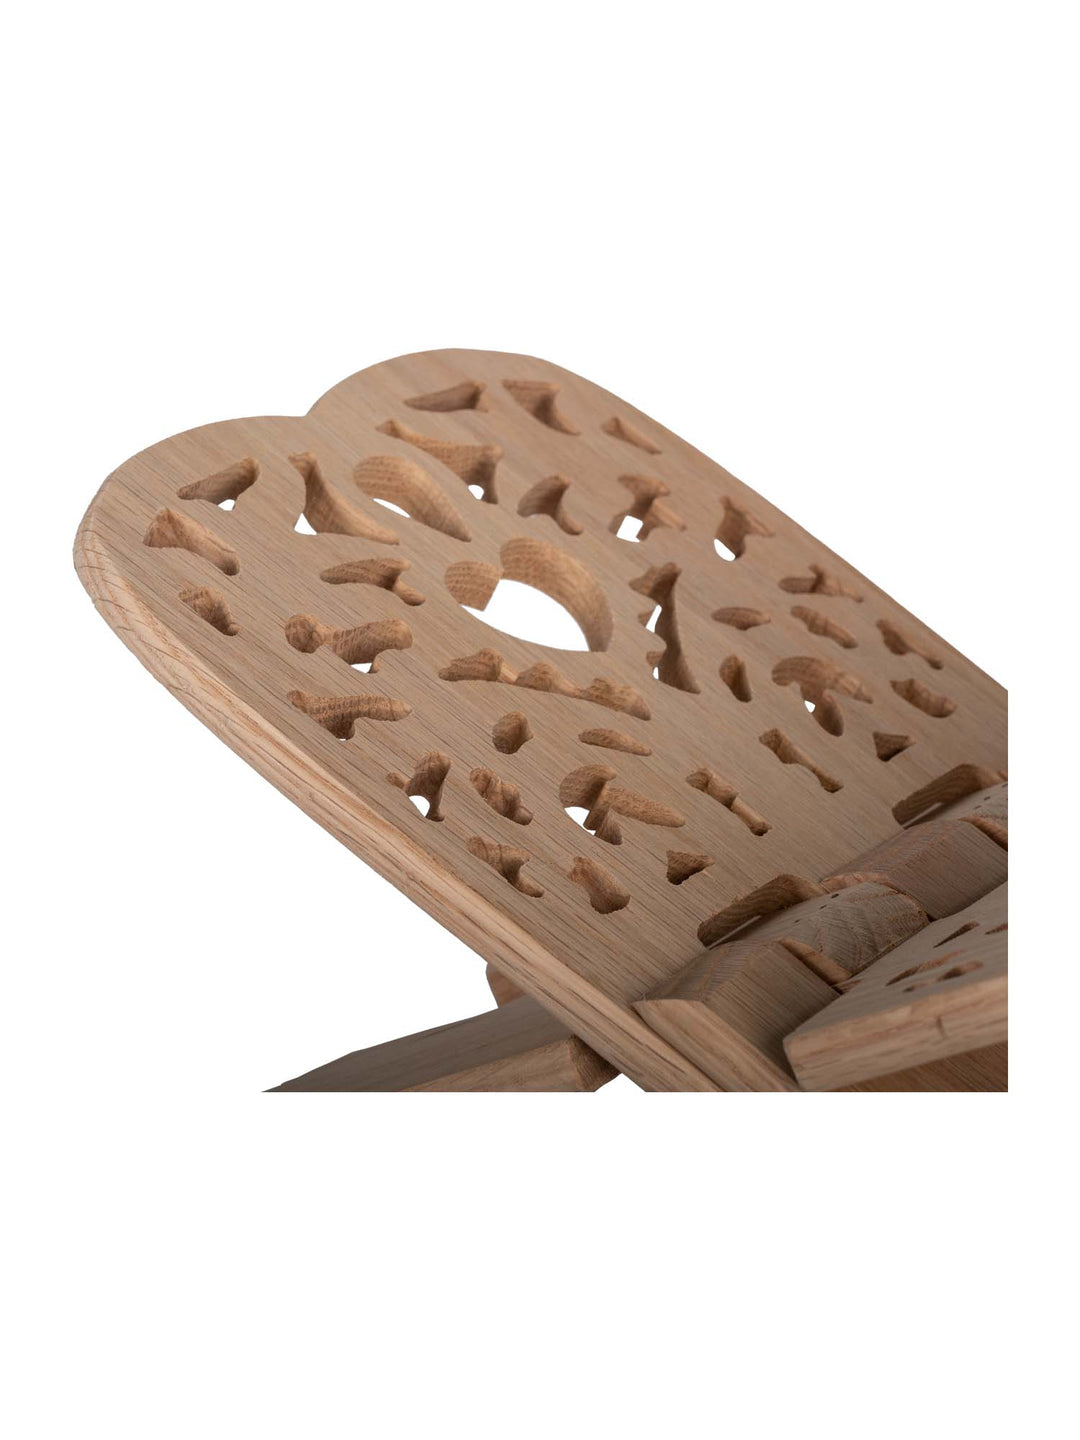 Wooden Rehal with heart